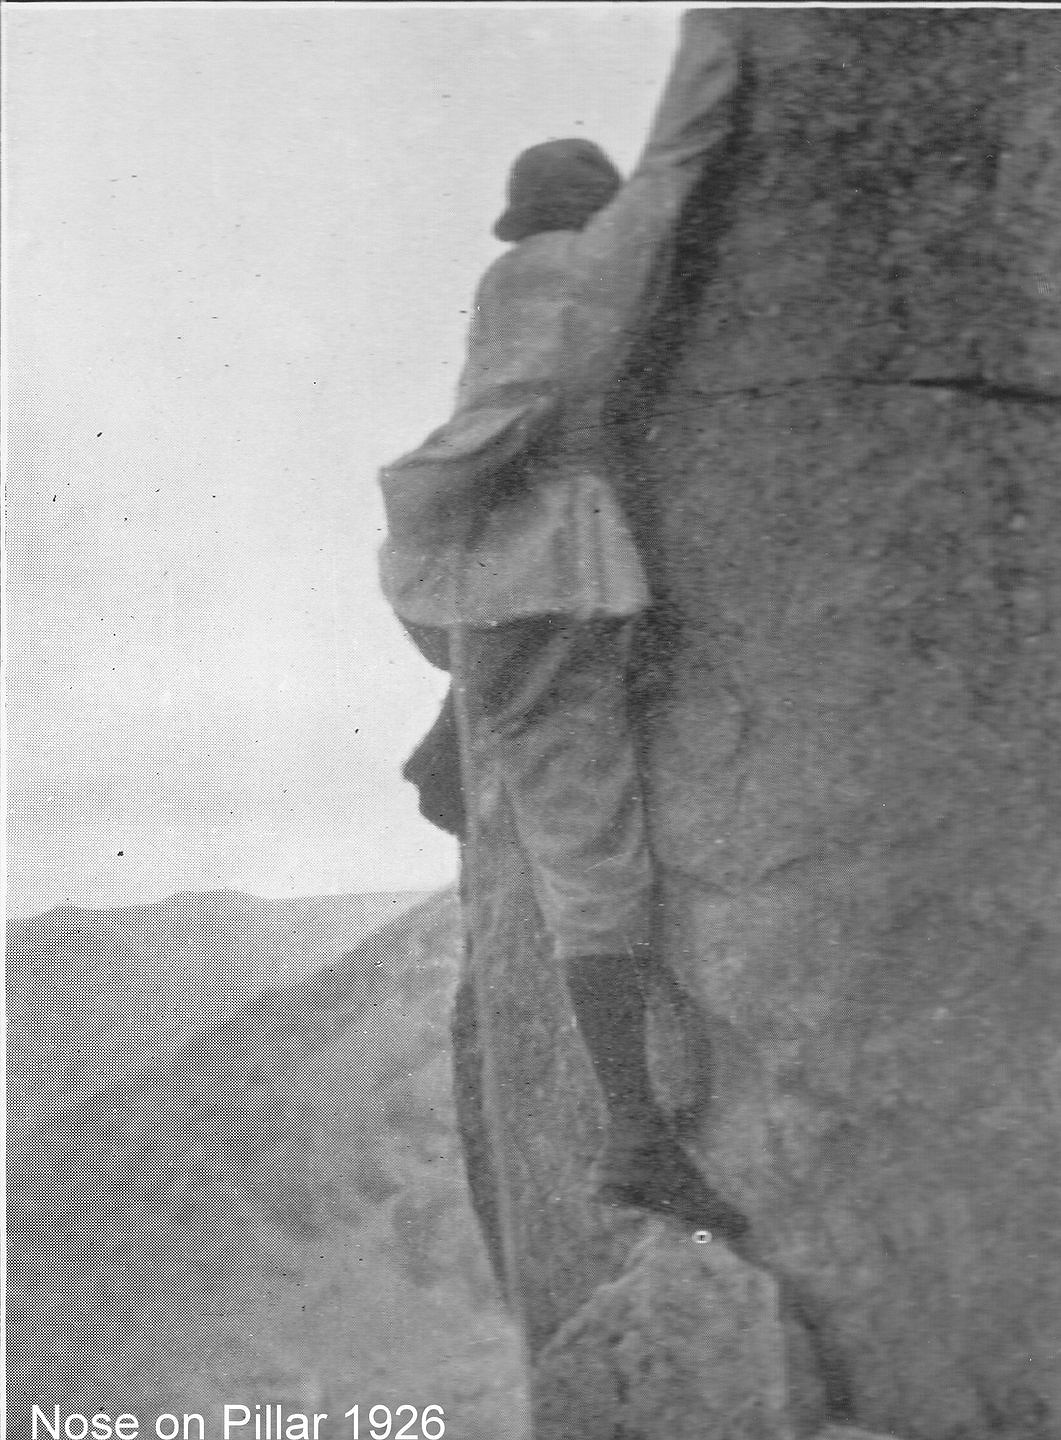 A climber on the Nose on Pillar in 1926  © Pinnacle Club Collection